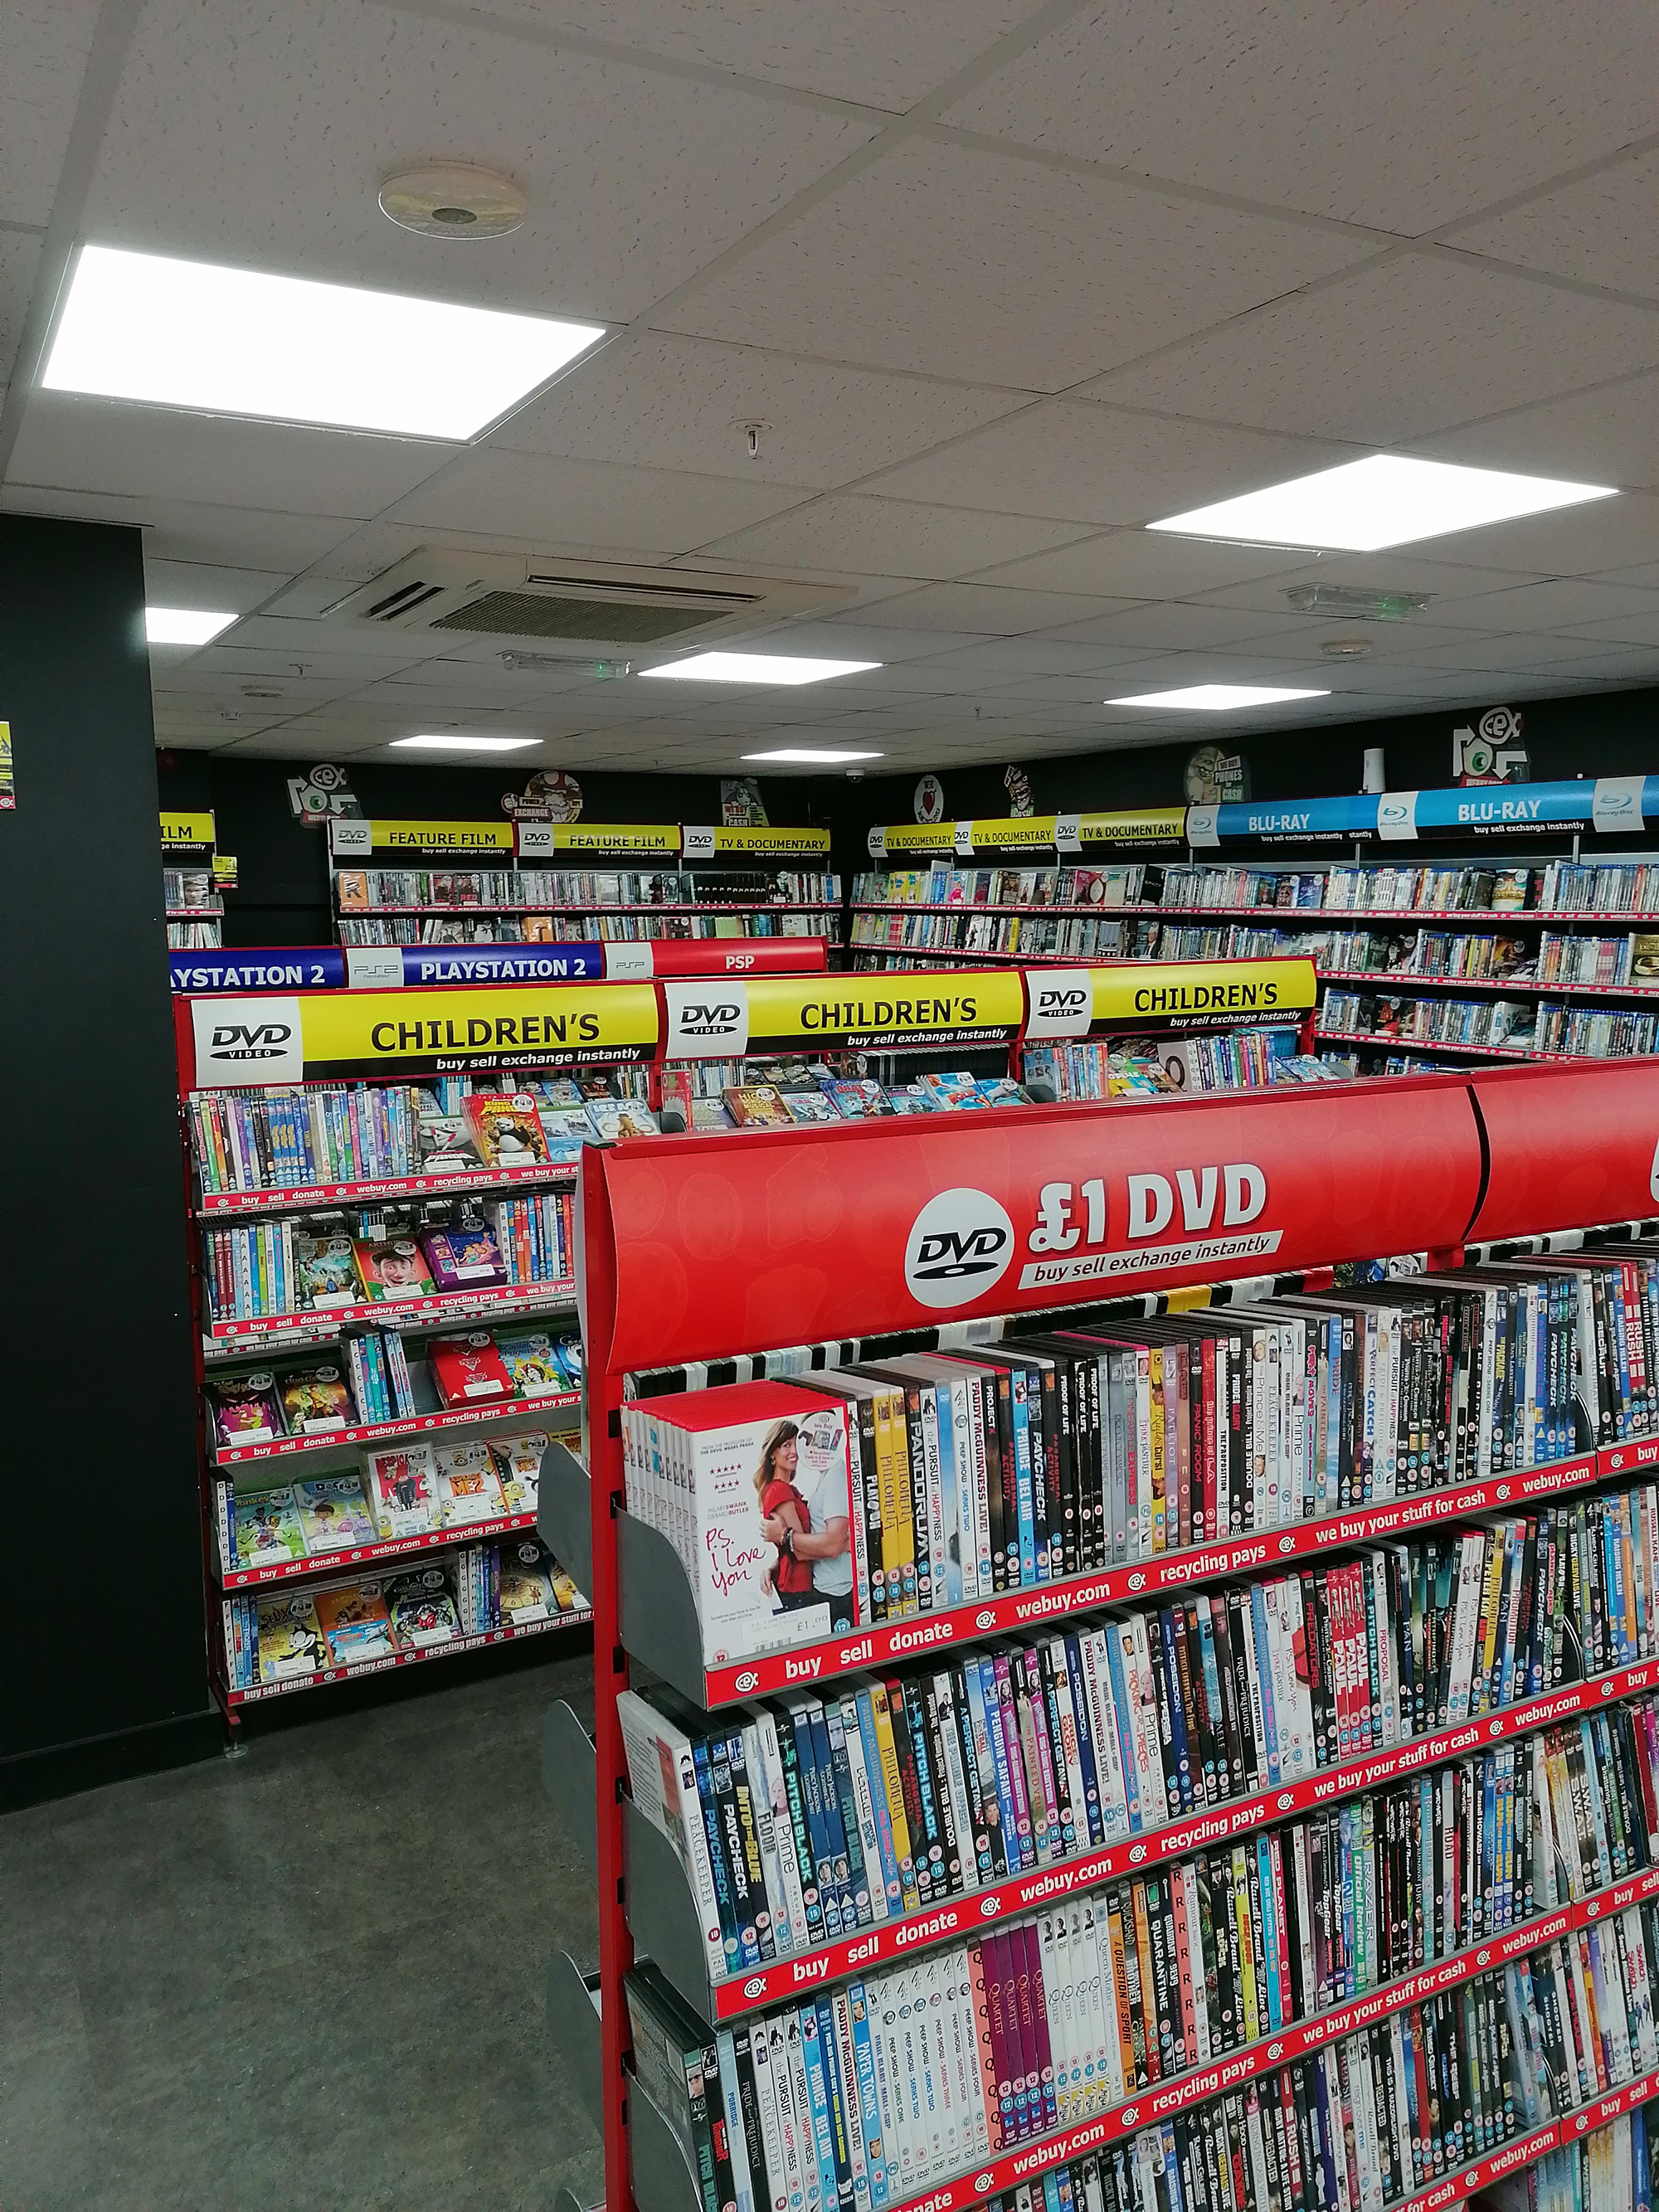 CeX Keighley 03301 235986